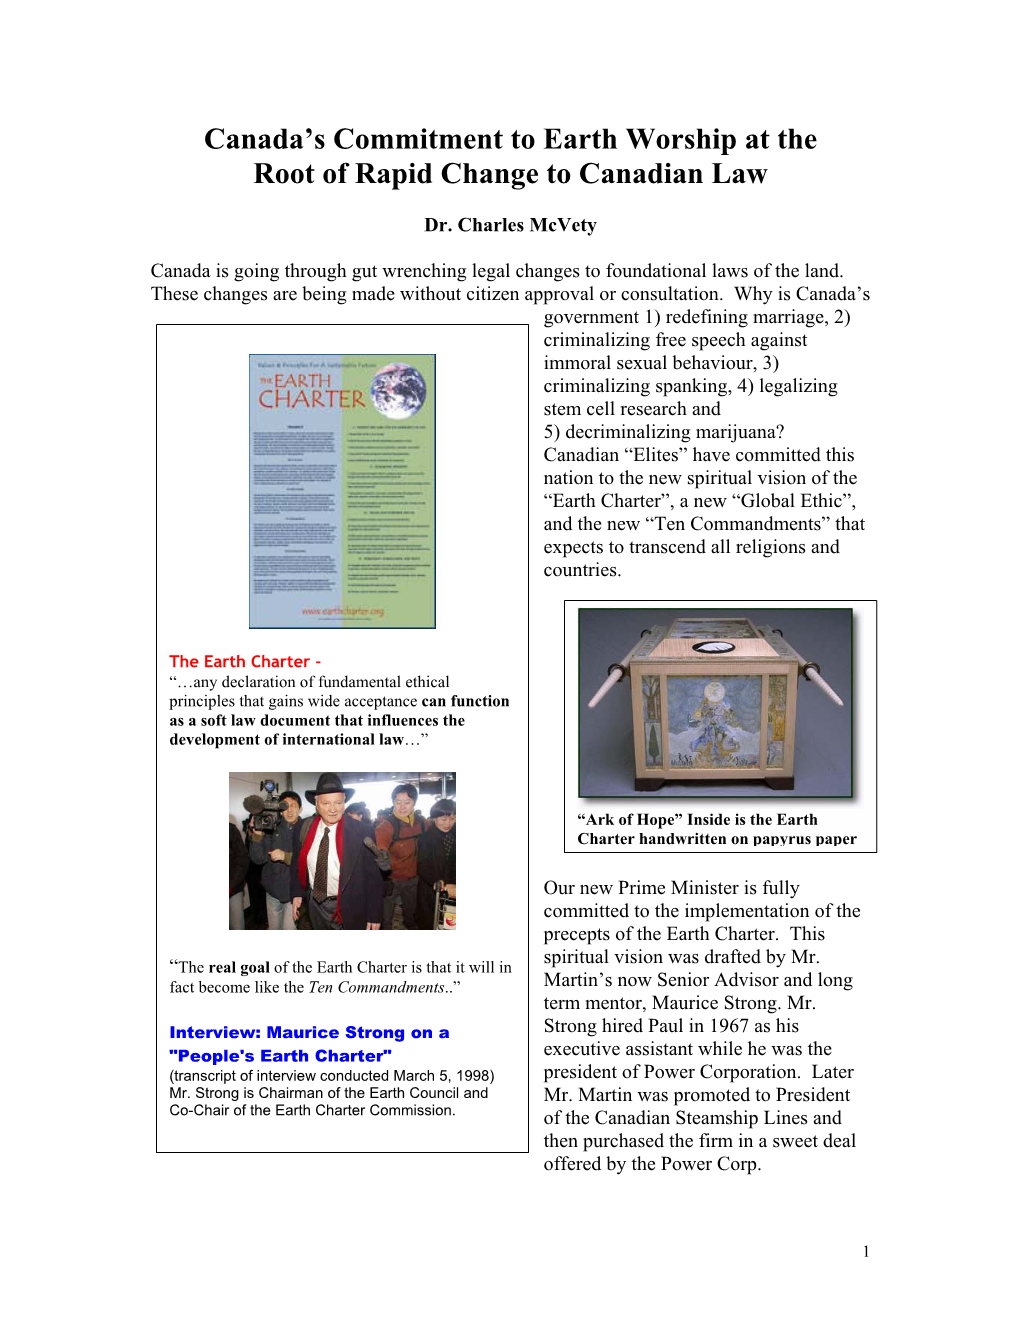 Canada's Commitment to Earth Worship At